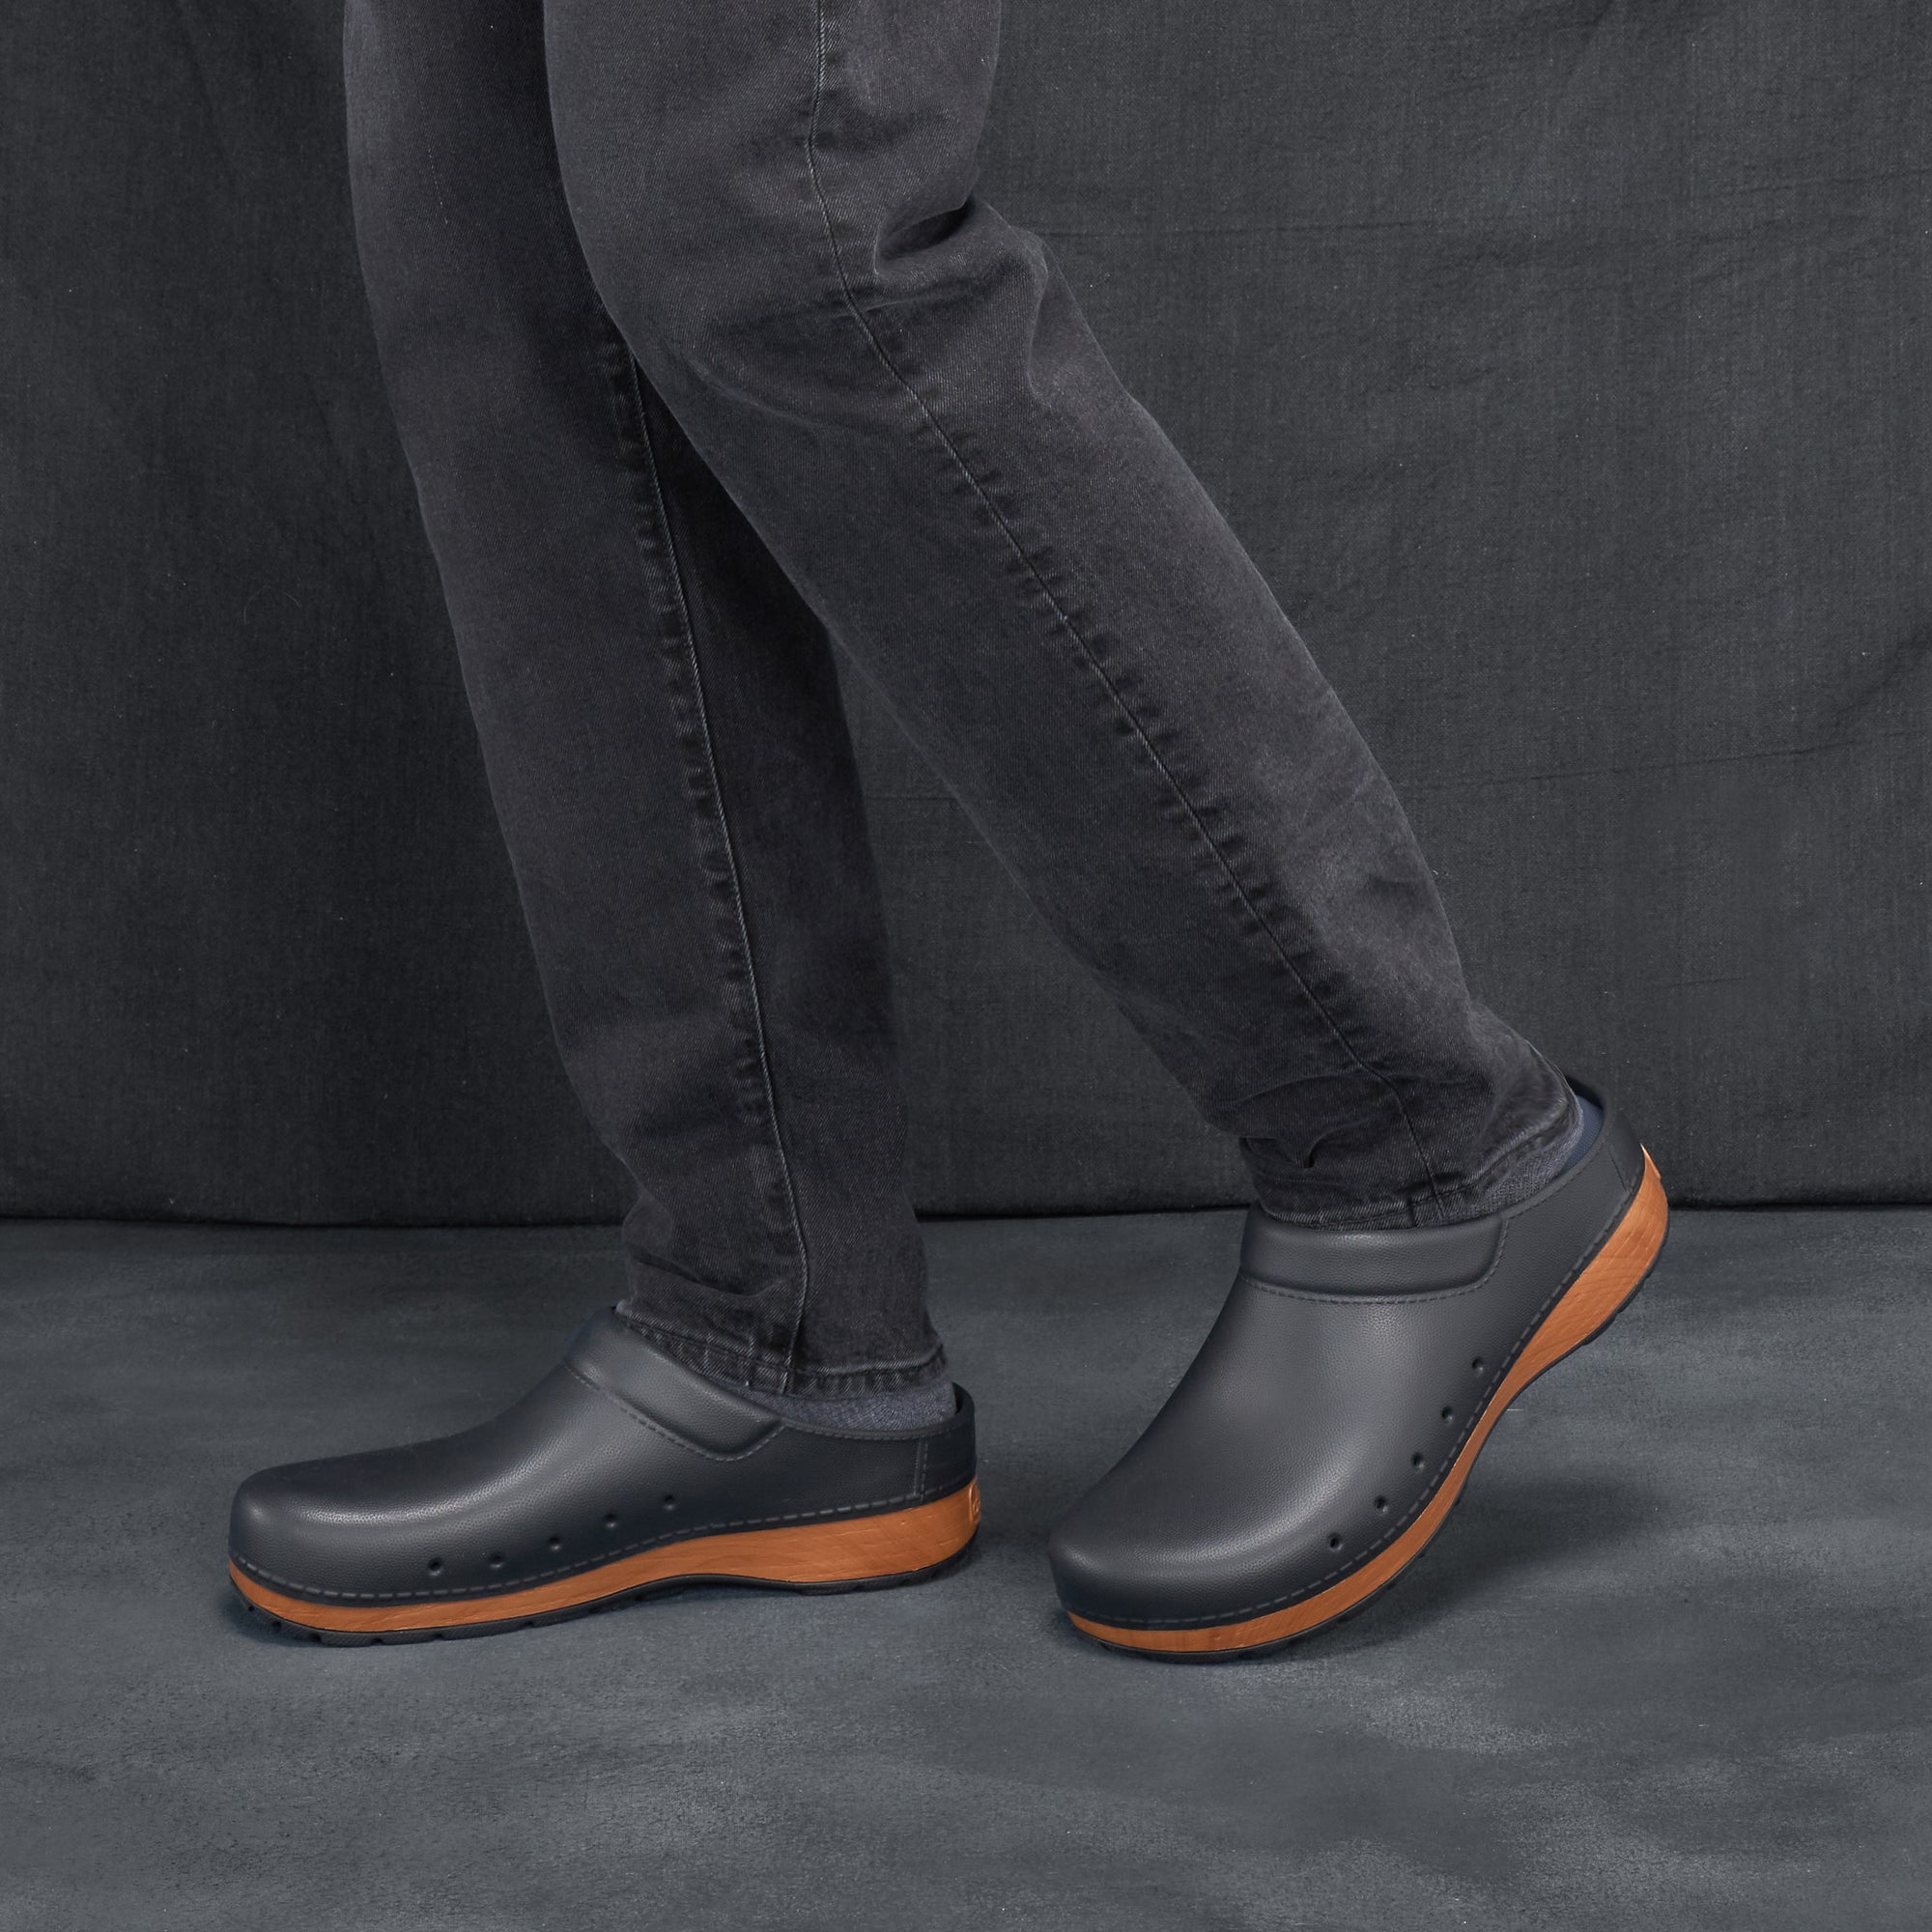 Black men's EVA clogs with a wood-patterned outsole.